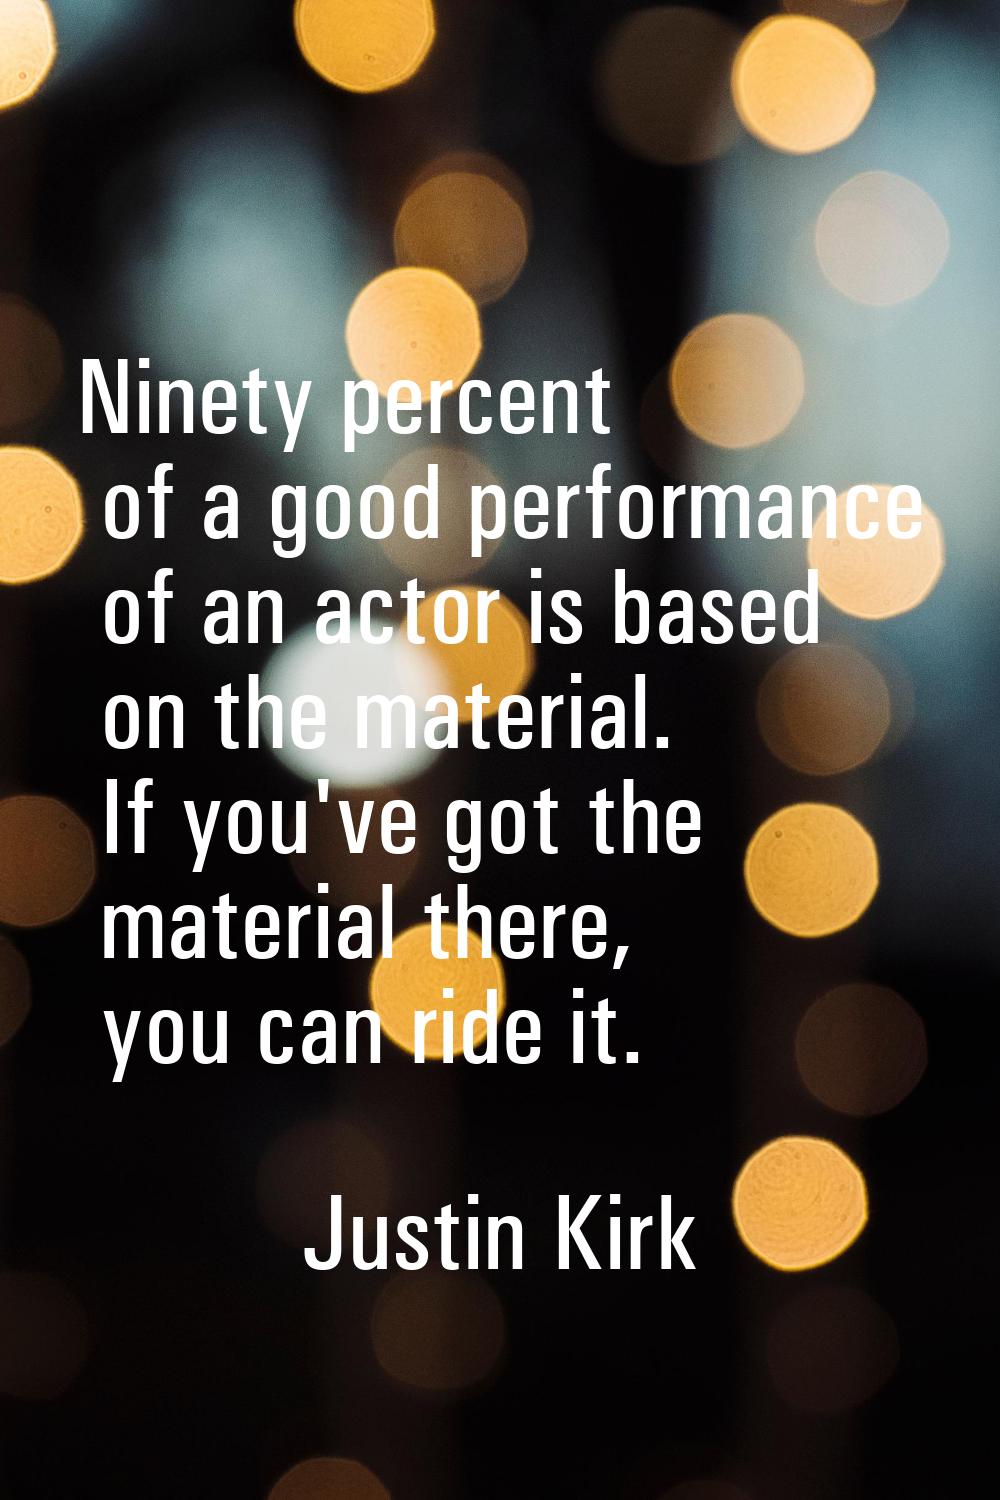 Ninety percent of a good performance of an actor is based on the material. If you've got the materi